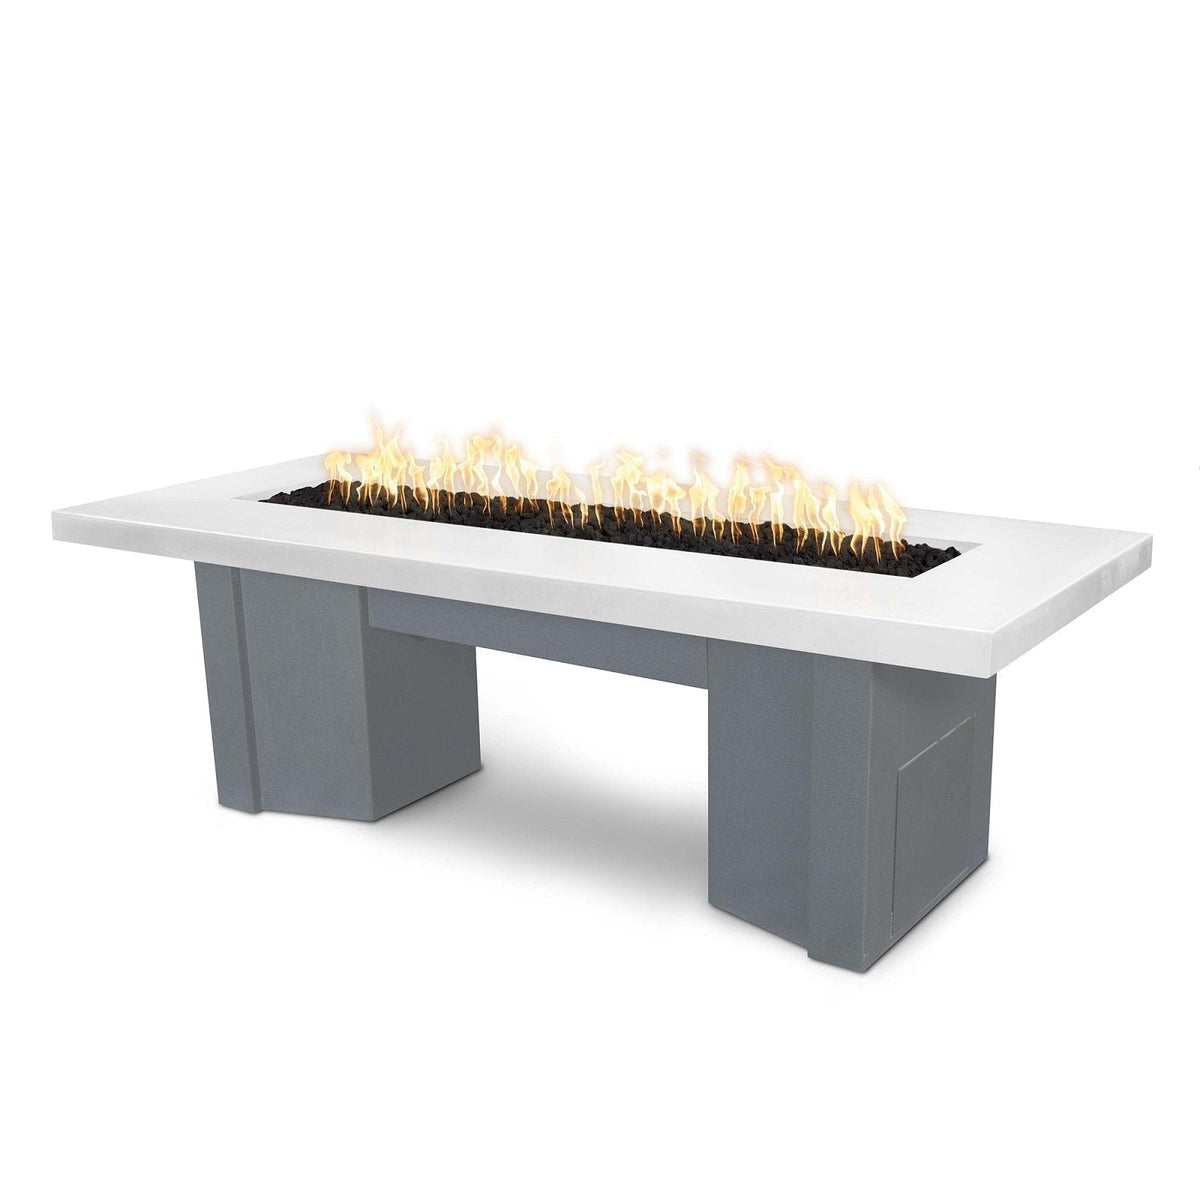 The Outdoor Plus Fire Features Limestone (-LIM) / Gray Powder Coated Steel (-GRY) The Outdoor Plus 78&quot; Alameda Fire Table Smooth Concrete in Liquid Propane - Match Lit with Flame Sense System / OPT-ALMGFRC78FSML-LP